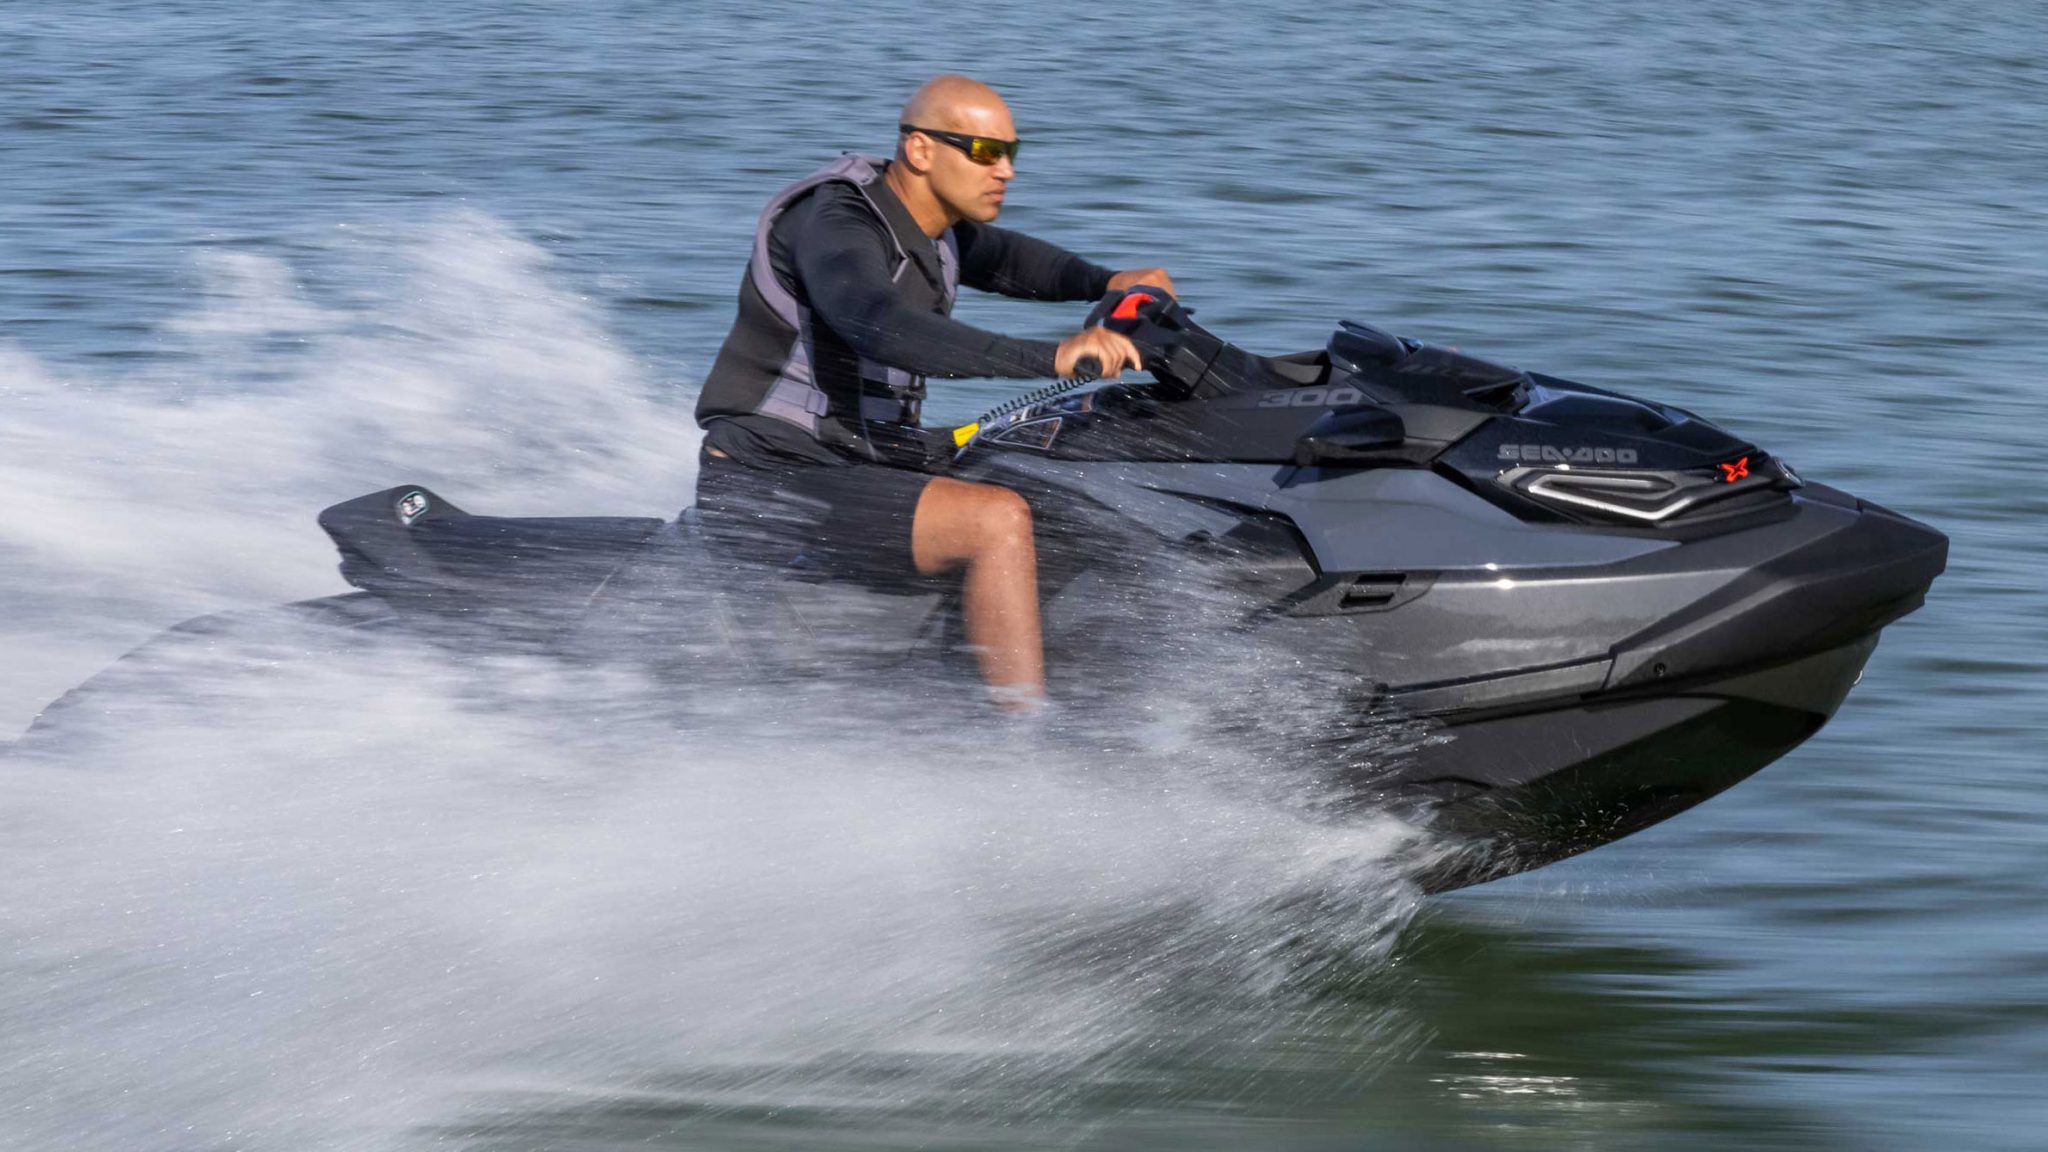 2022 SeaDoo rxpx300 black Archives